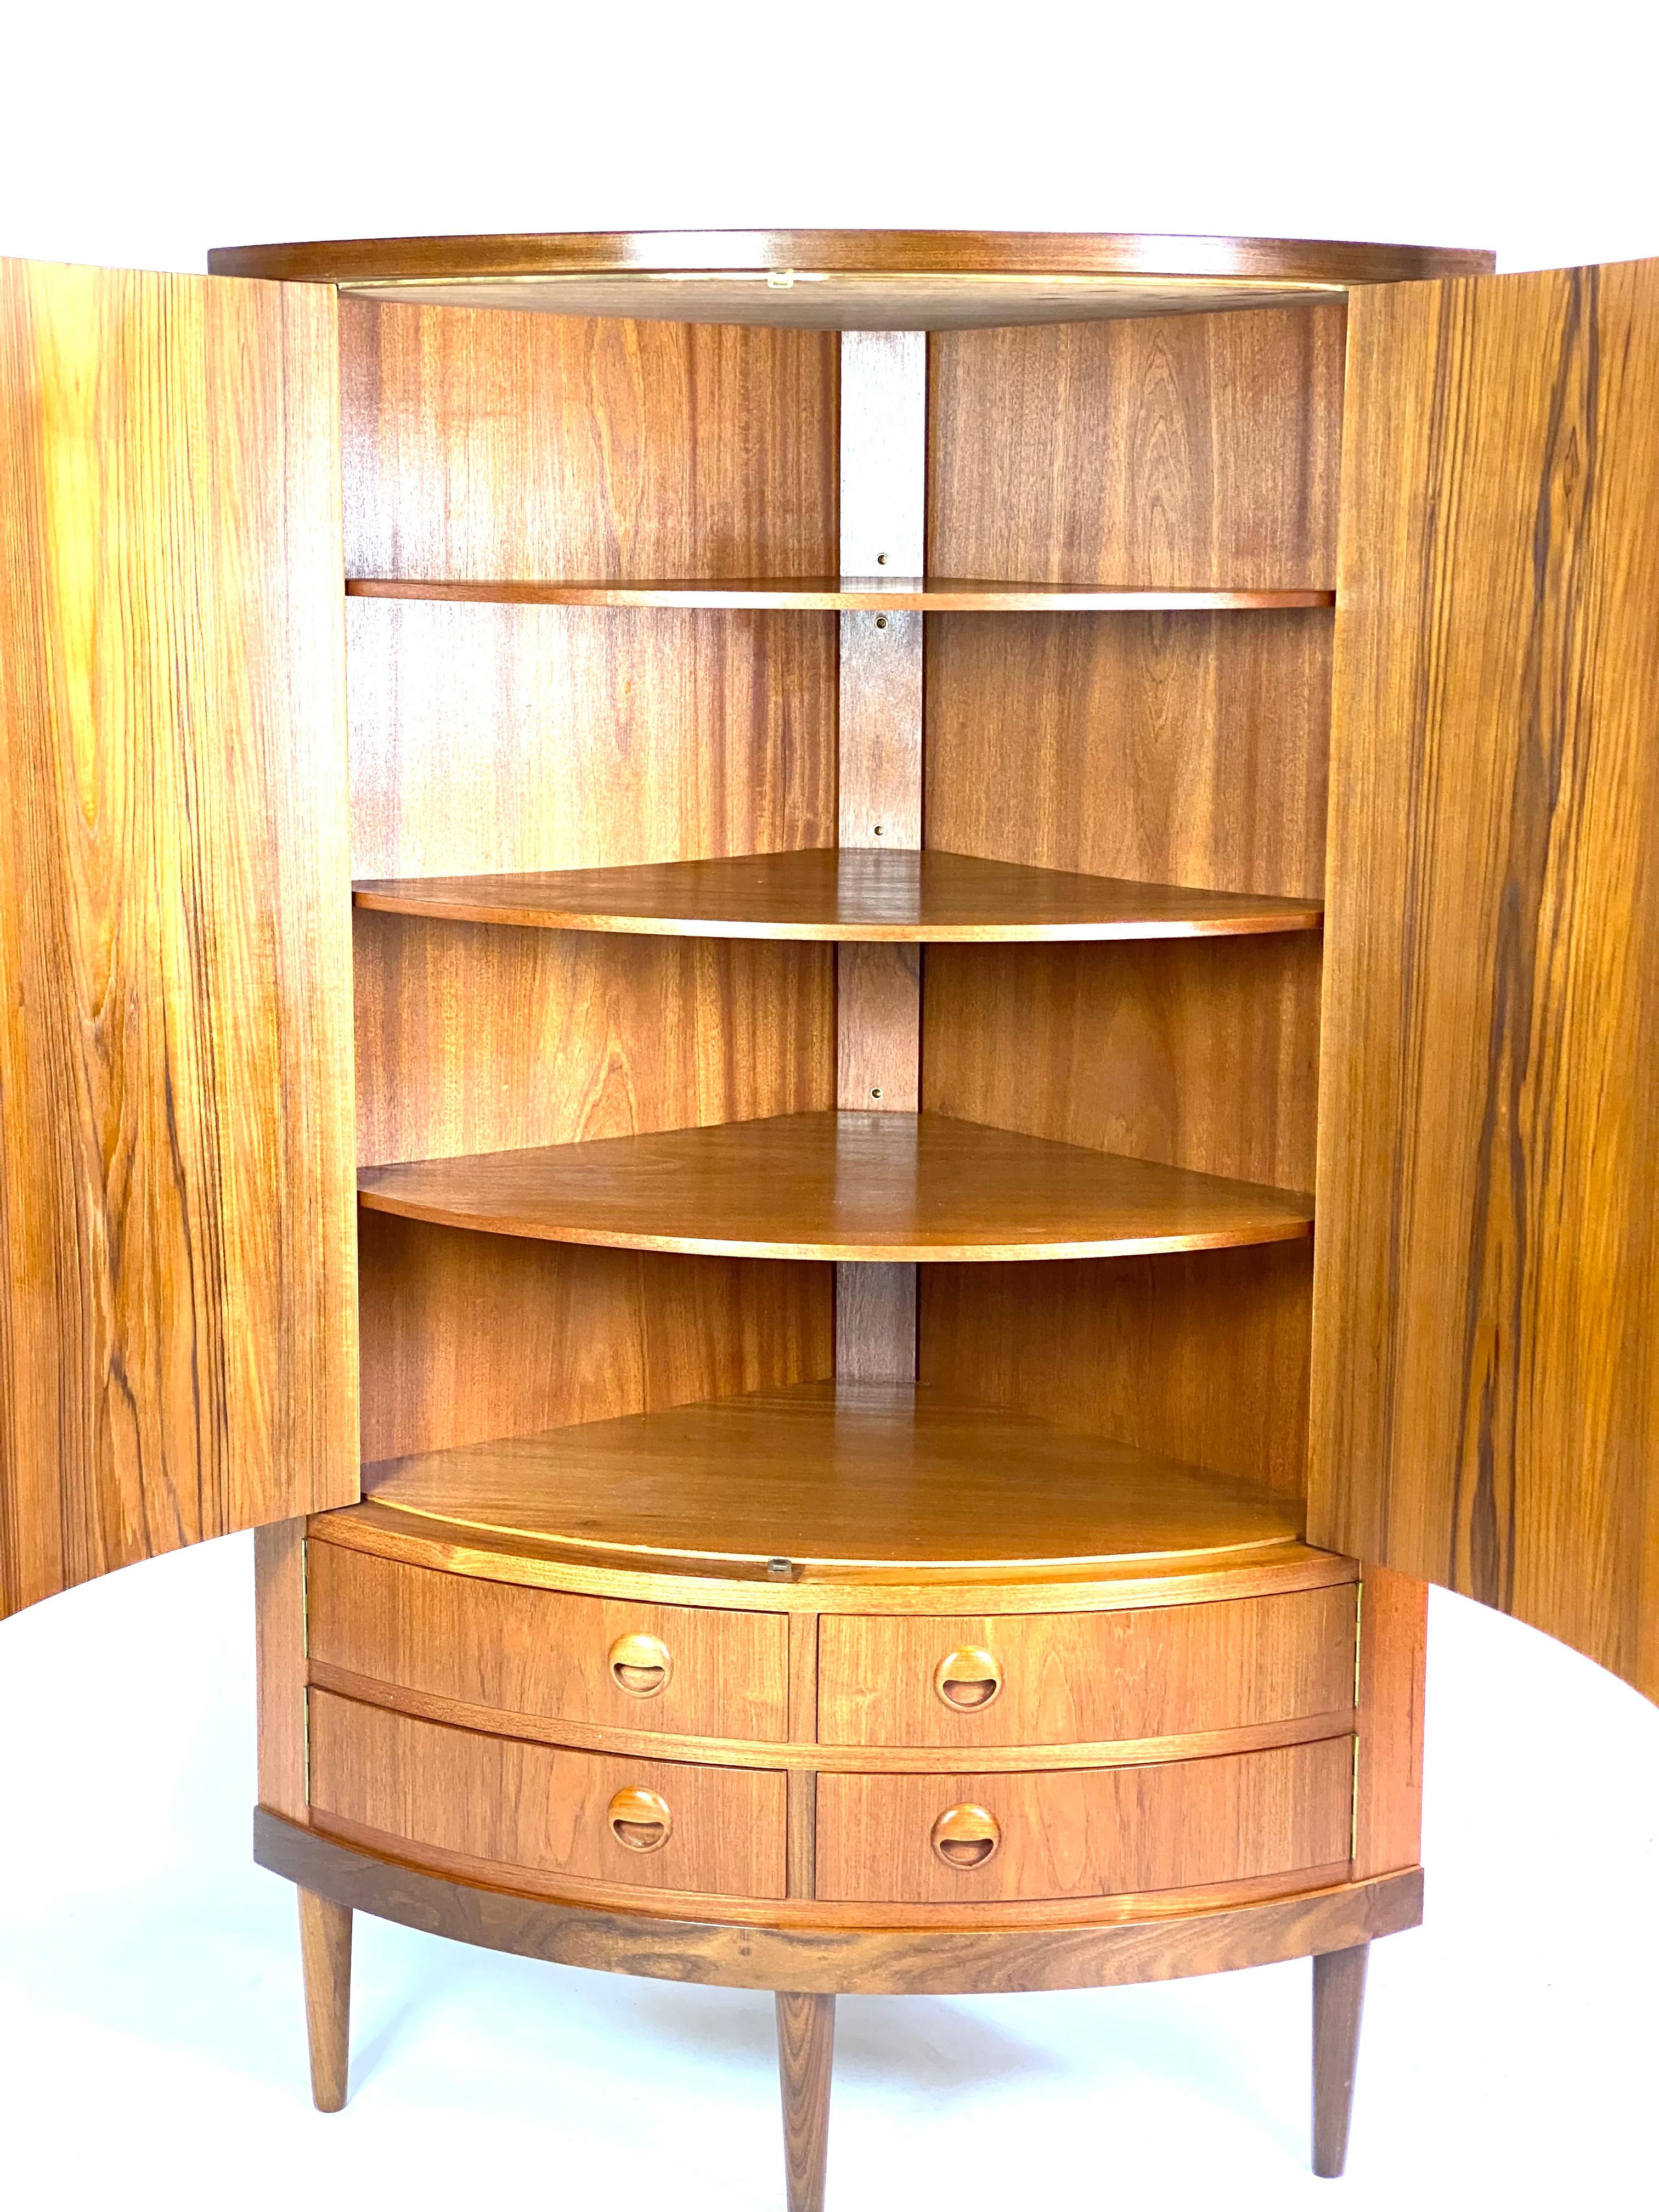 Corner cabinet in teak designed by Kai Kristiansen from around the 1960s. The cabinet is in great vintage condition.